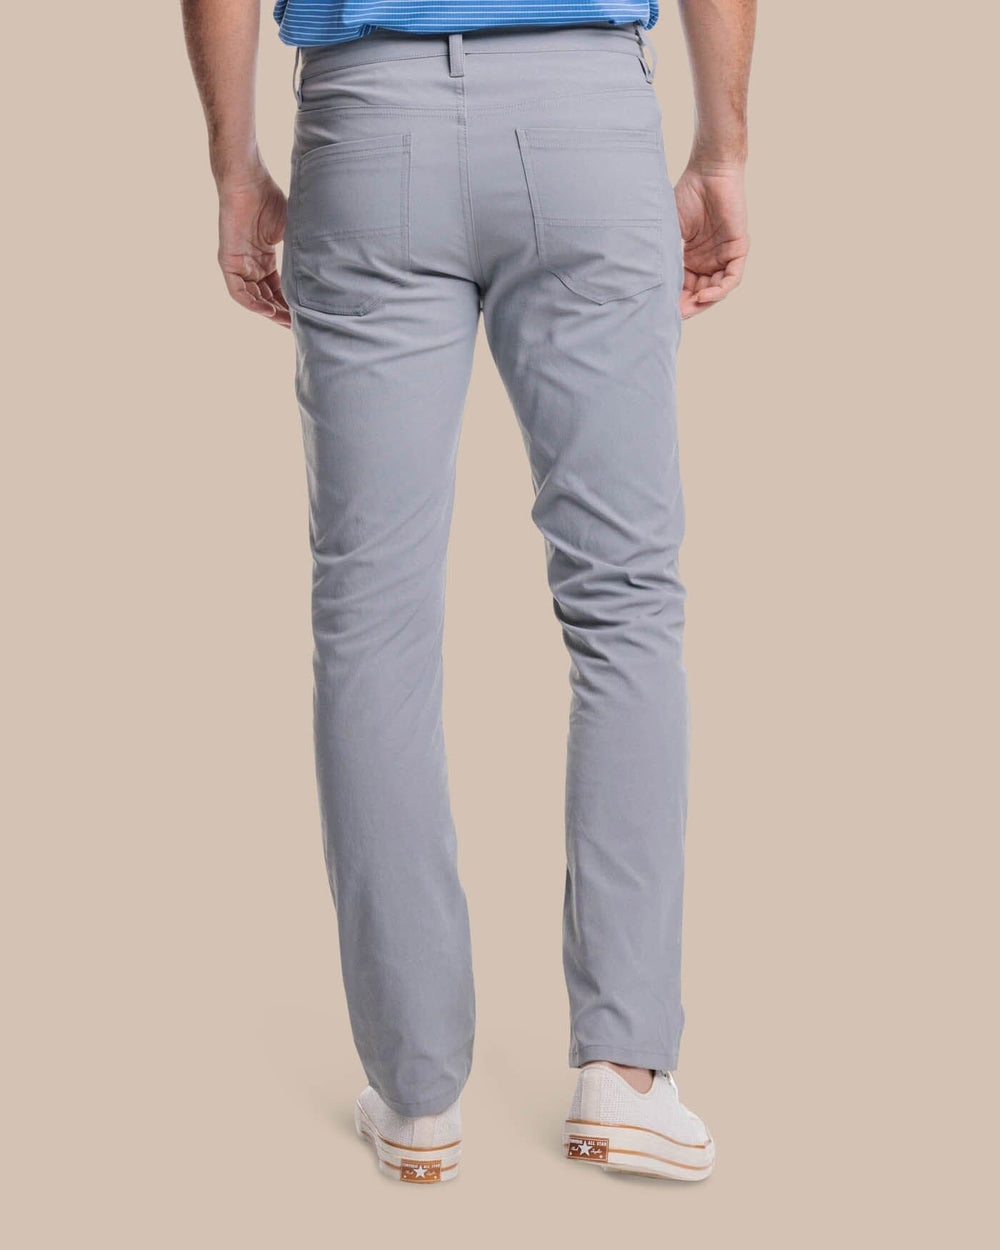 The back view of the Southern Tide Intercoastal Performance Pant Steel Grey by Southern Tide - Steel Grey